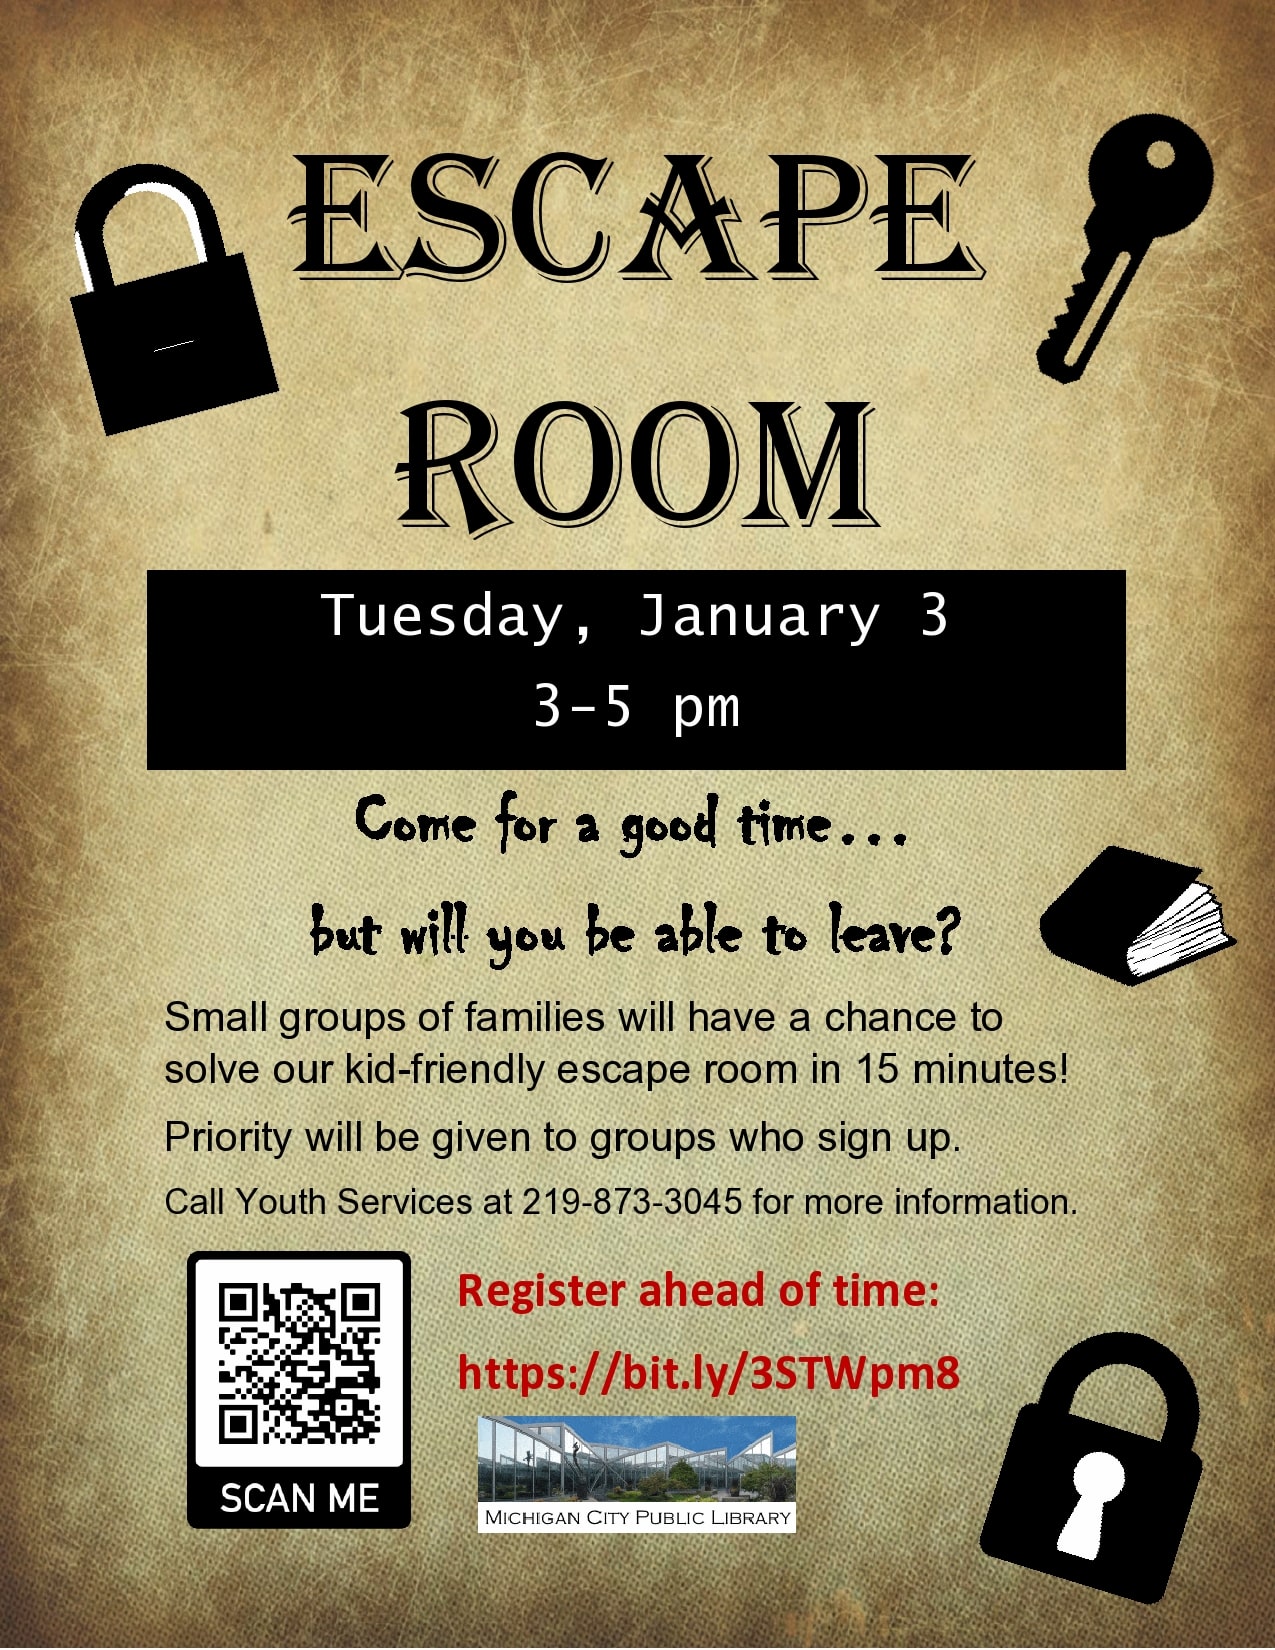 Escape Room, Tuesday, January 3, 3-5 pm, register at https://bit.ly/3STWpm8